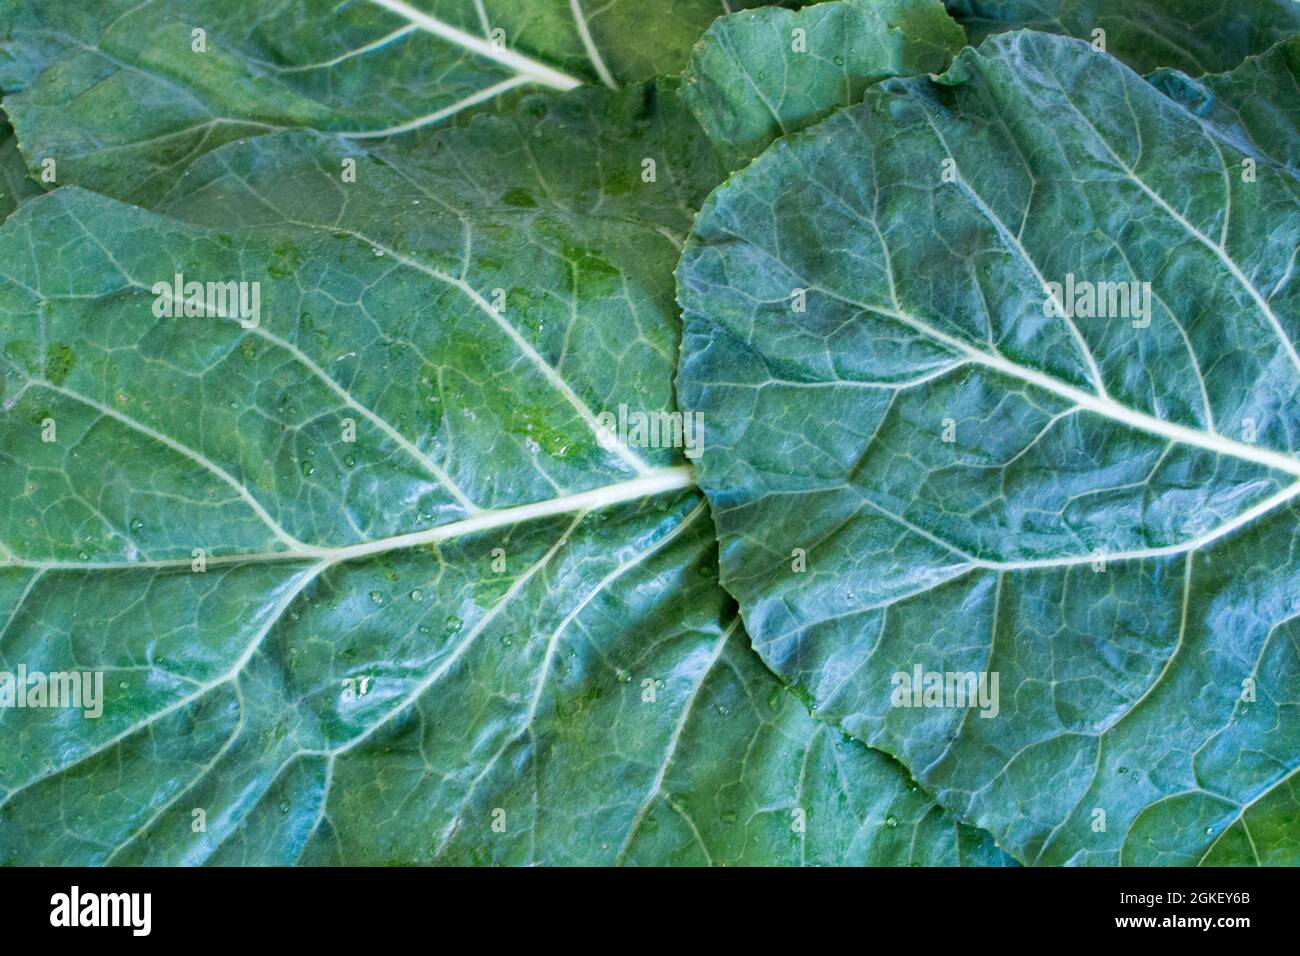 Looking down on a pile of scattered green Lacinato kale / cavolo nero Stock Photo